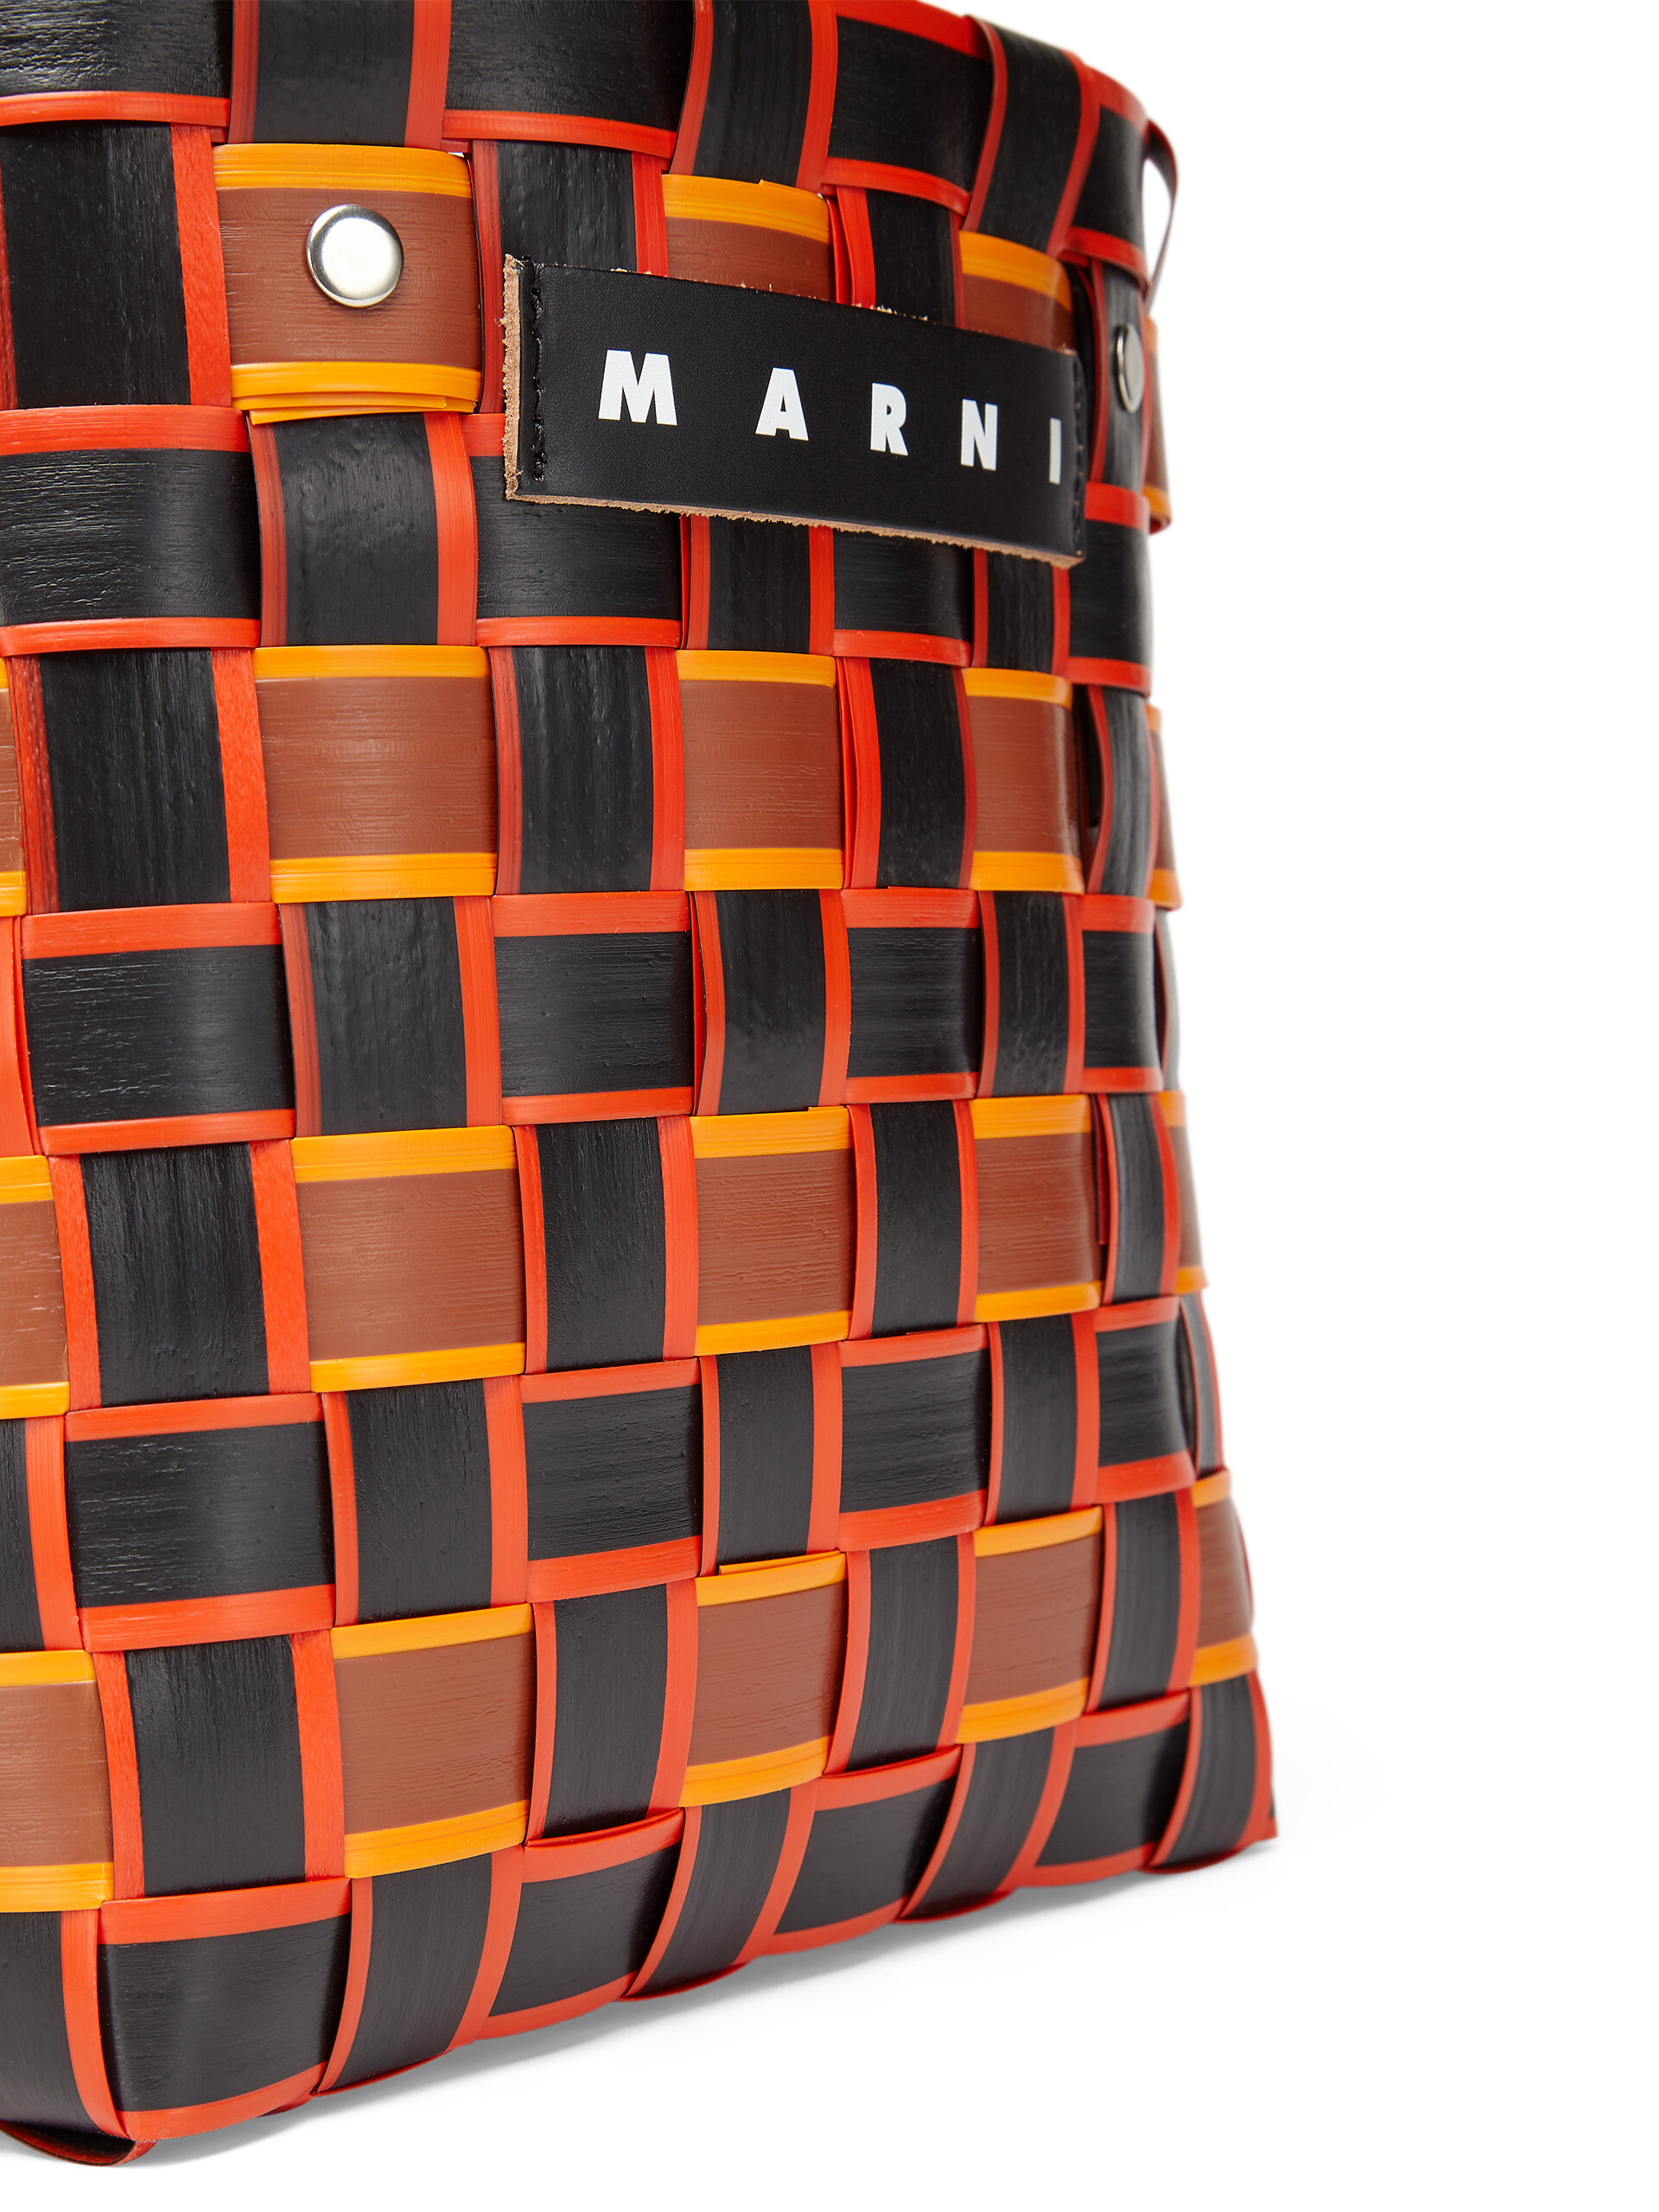 MARNI MARKET TAPE BASKET bag in orange and black woven material - Shopping Bags - Image 4